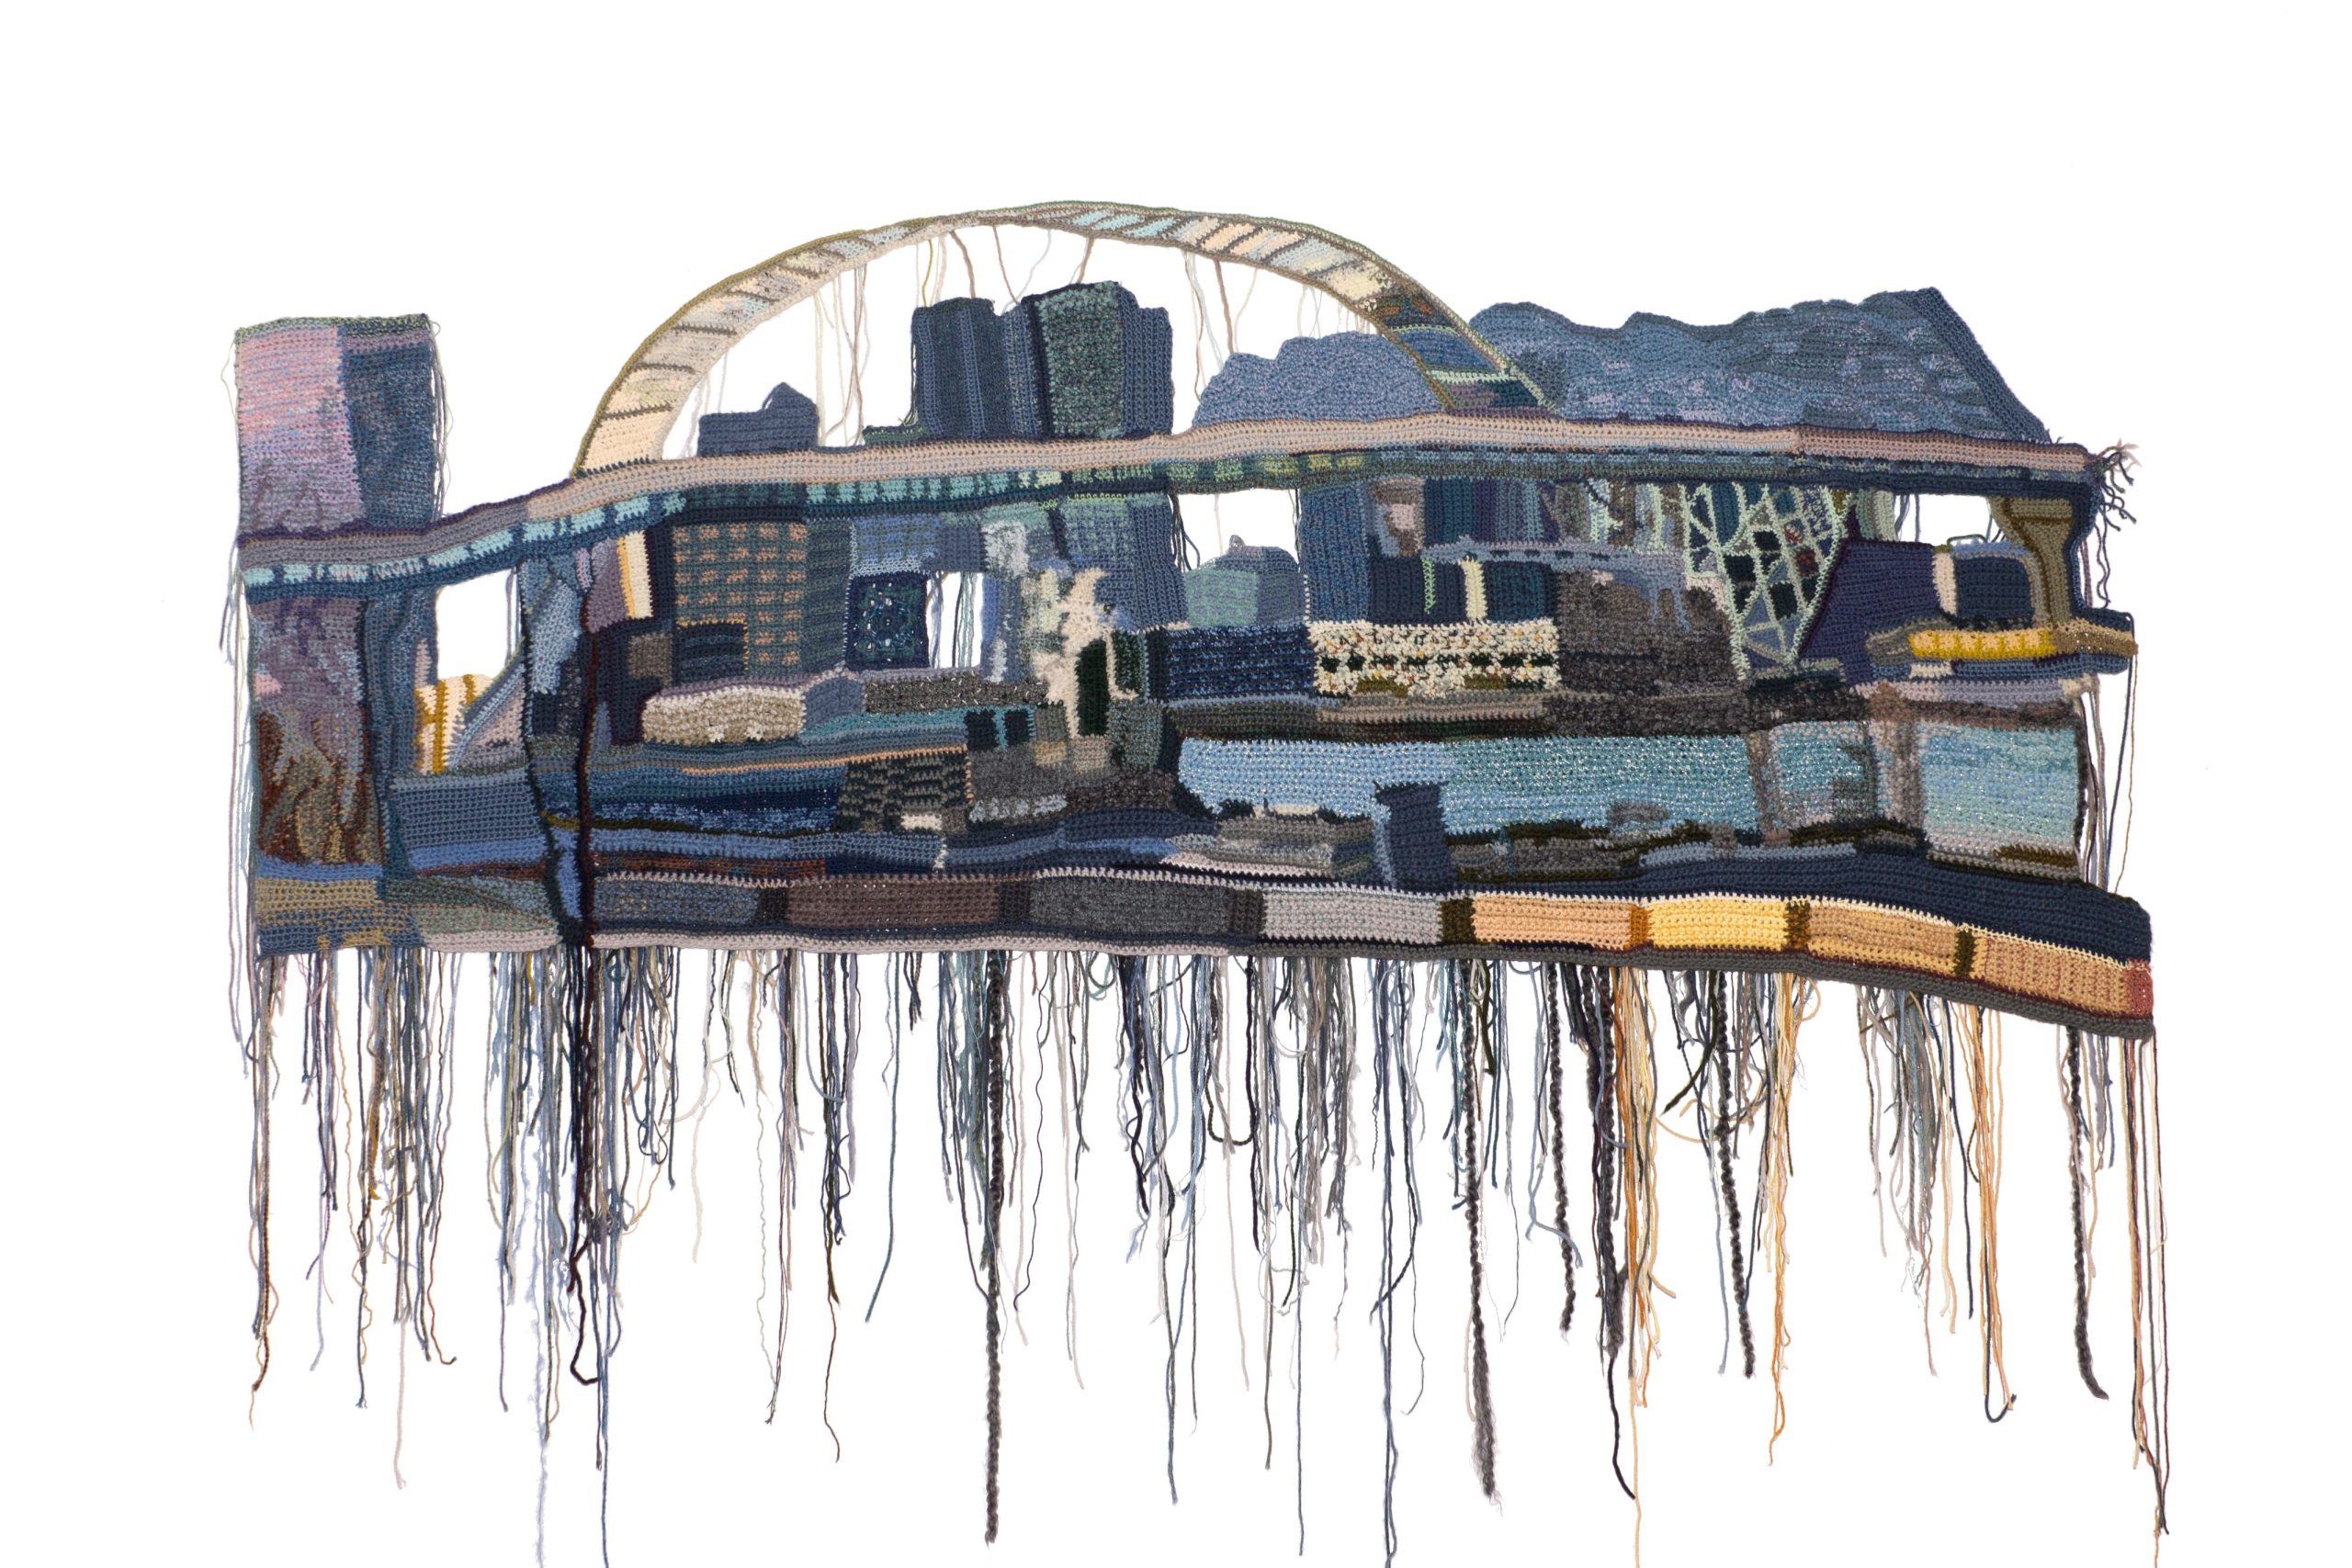 EitherSideof theFremont_31x70 inches_2016